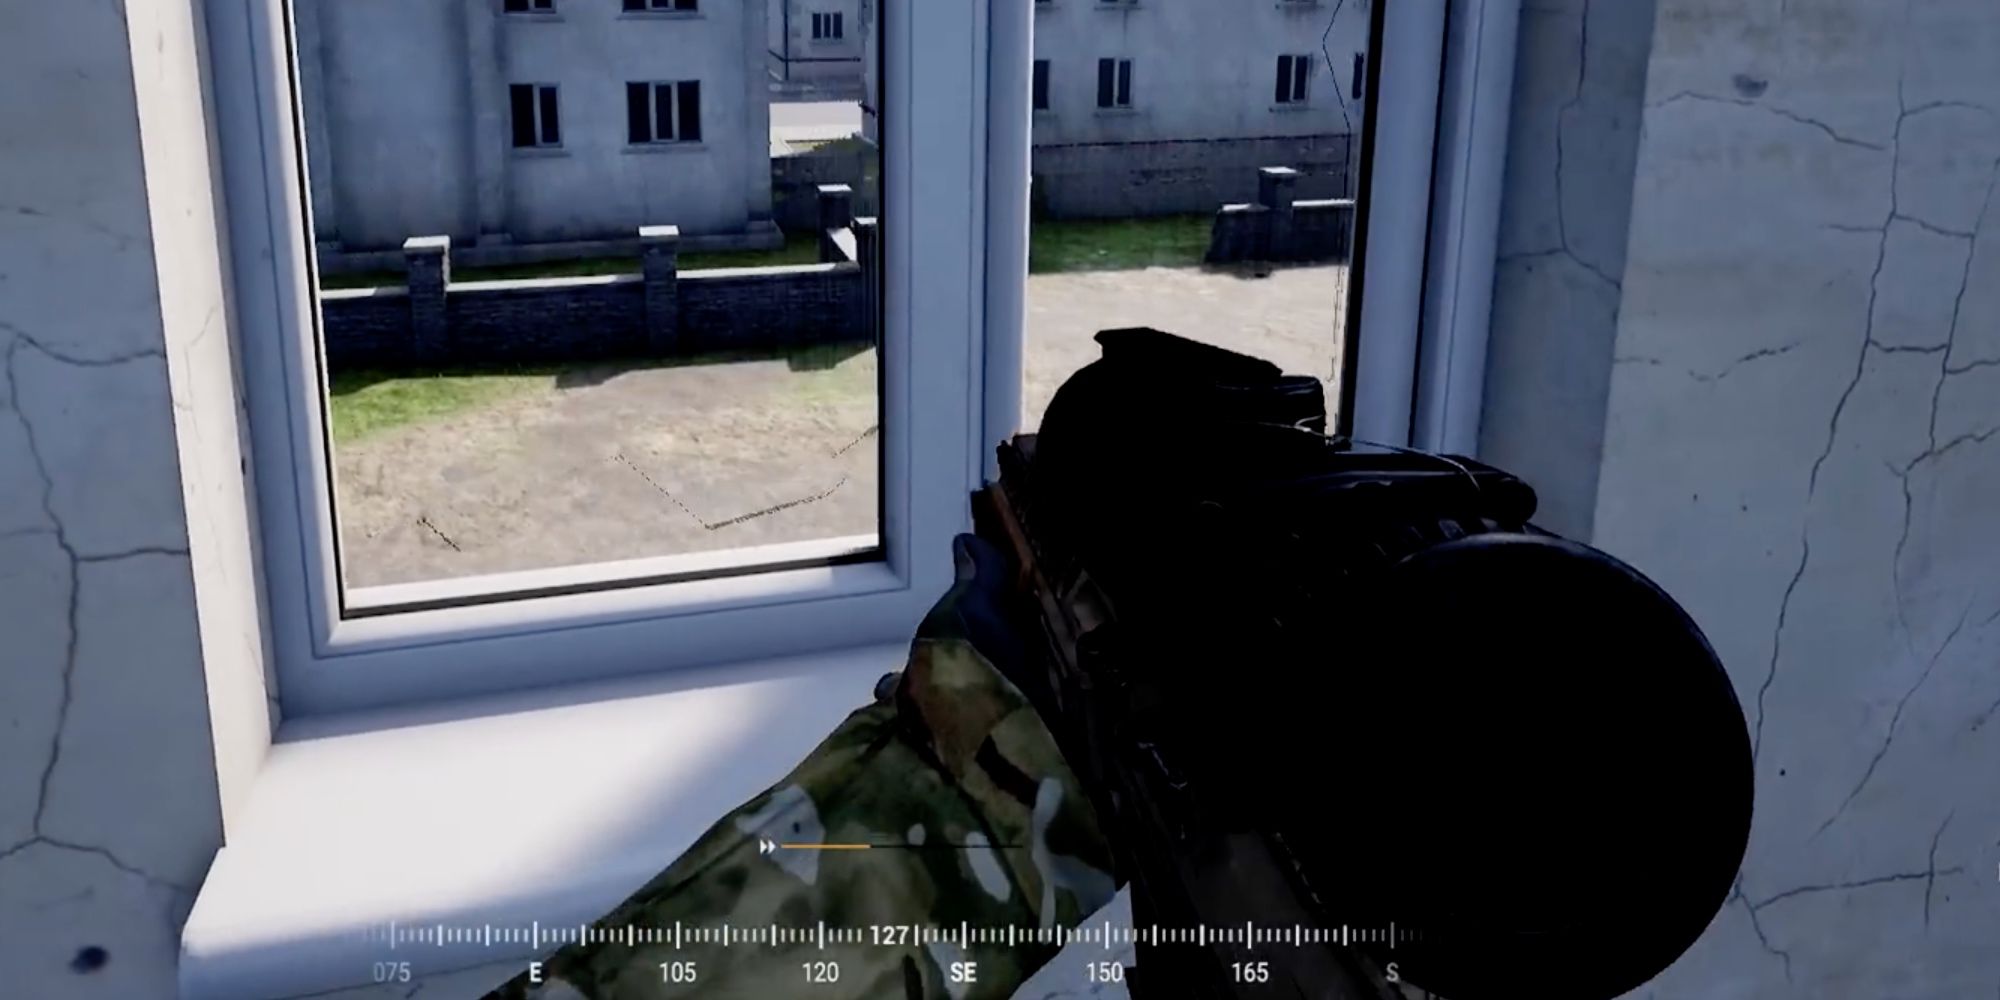 Player shoots an enemy using an L129A1 from inside a building to avoid taking damage